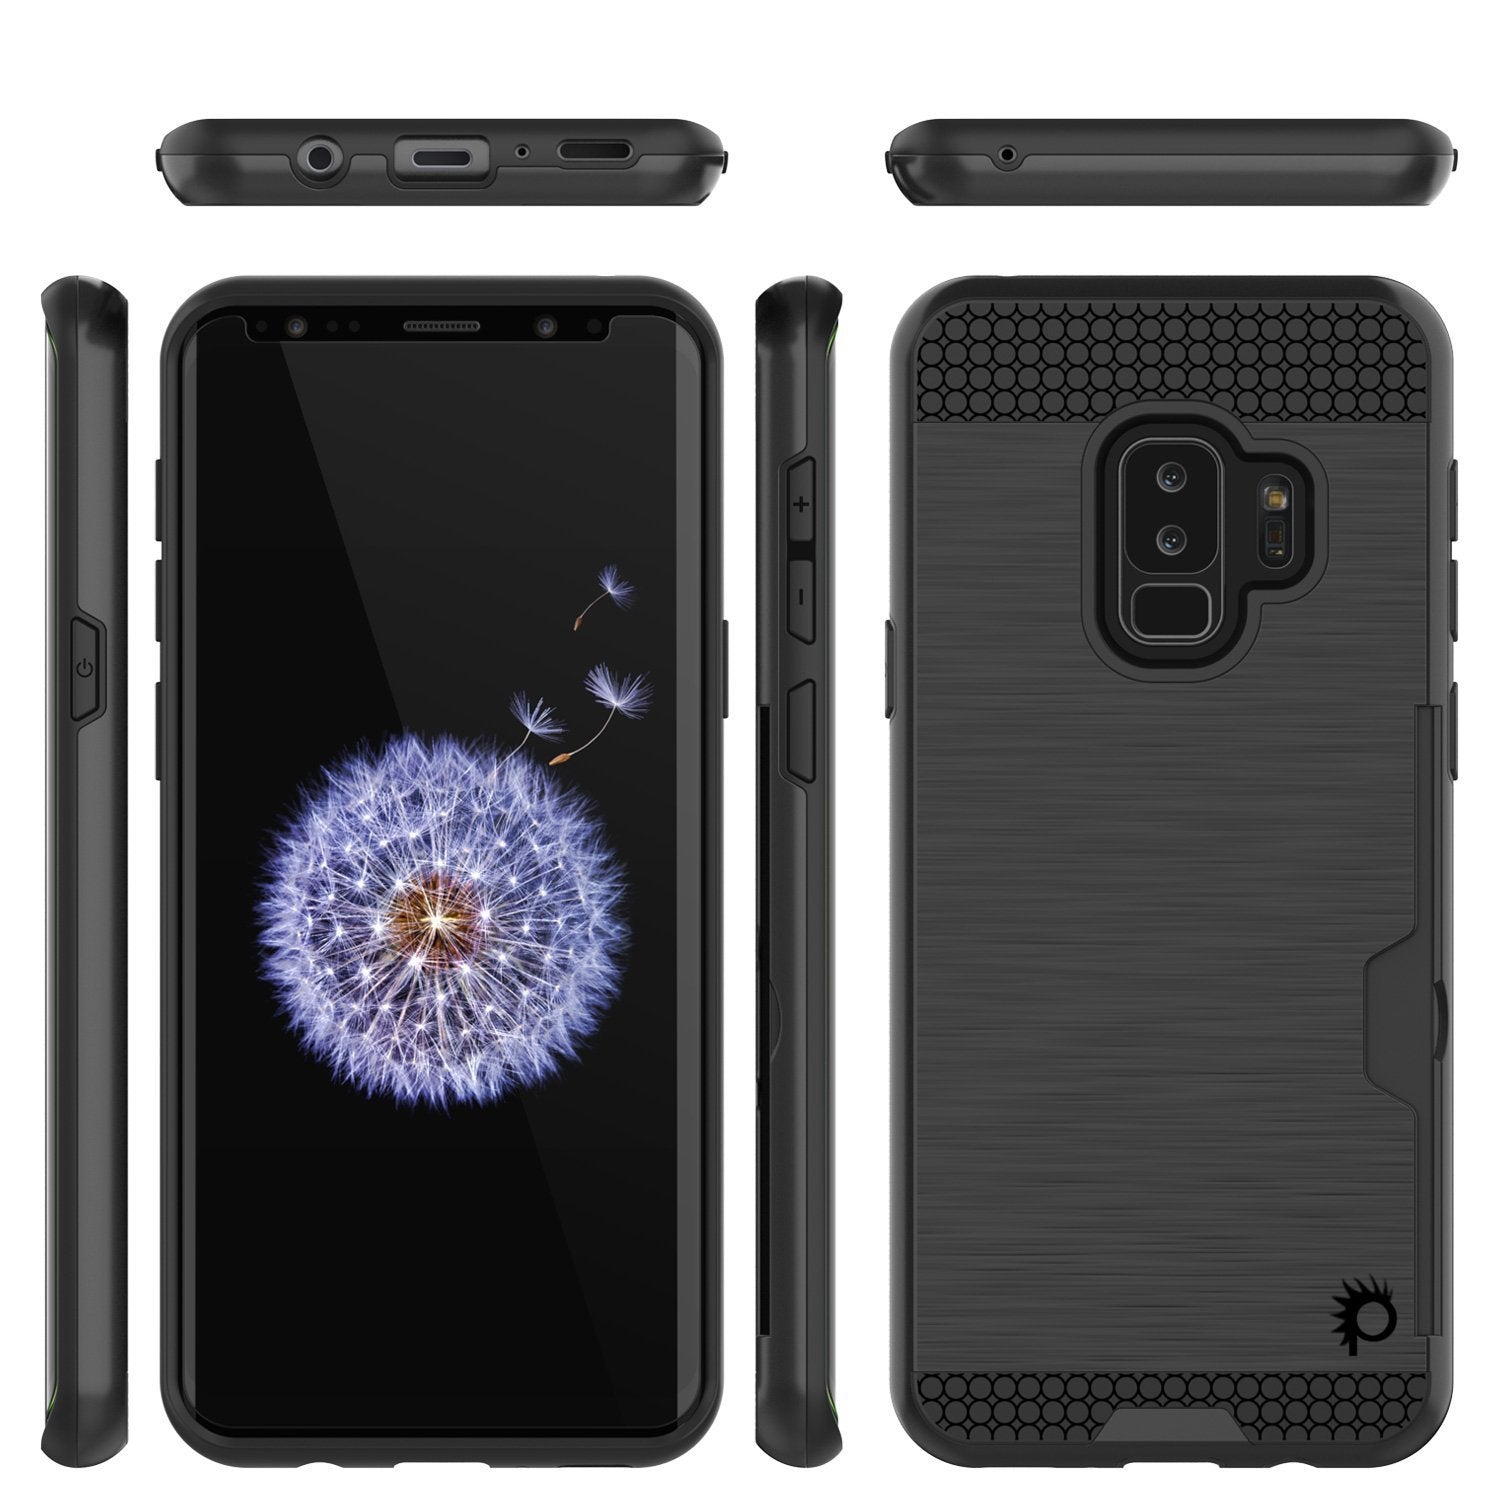 Galaxy S9 Plus Case, PUNKcase [SLOT Series] [Slim Fit] Dual-Layer Armor Cover w/Integrated Anti-Shock System, Credit Card Slot [Black] - PunkCase NZ